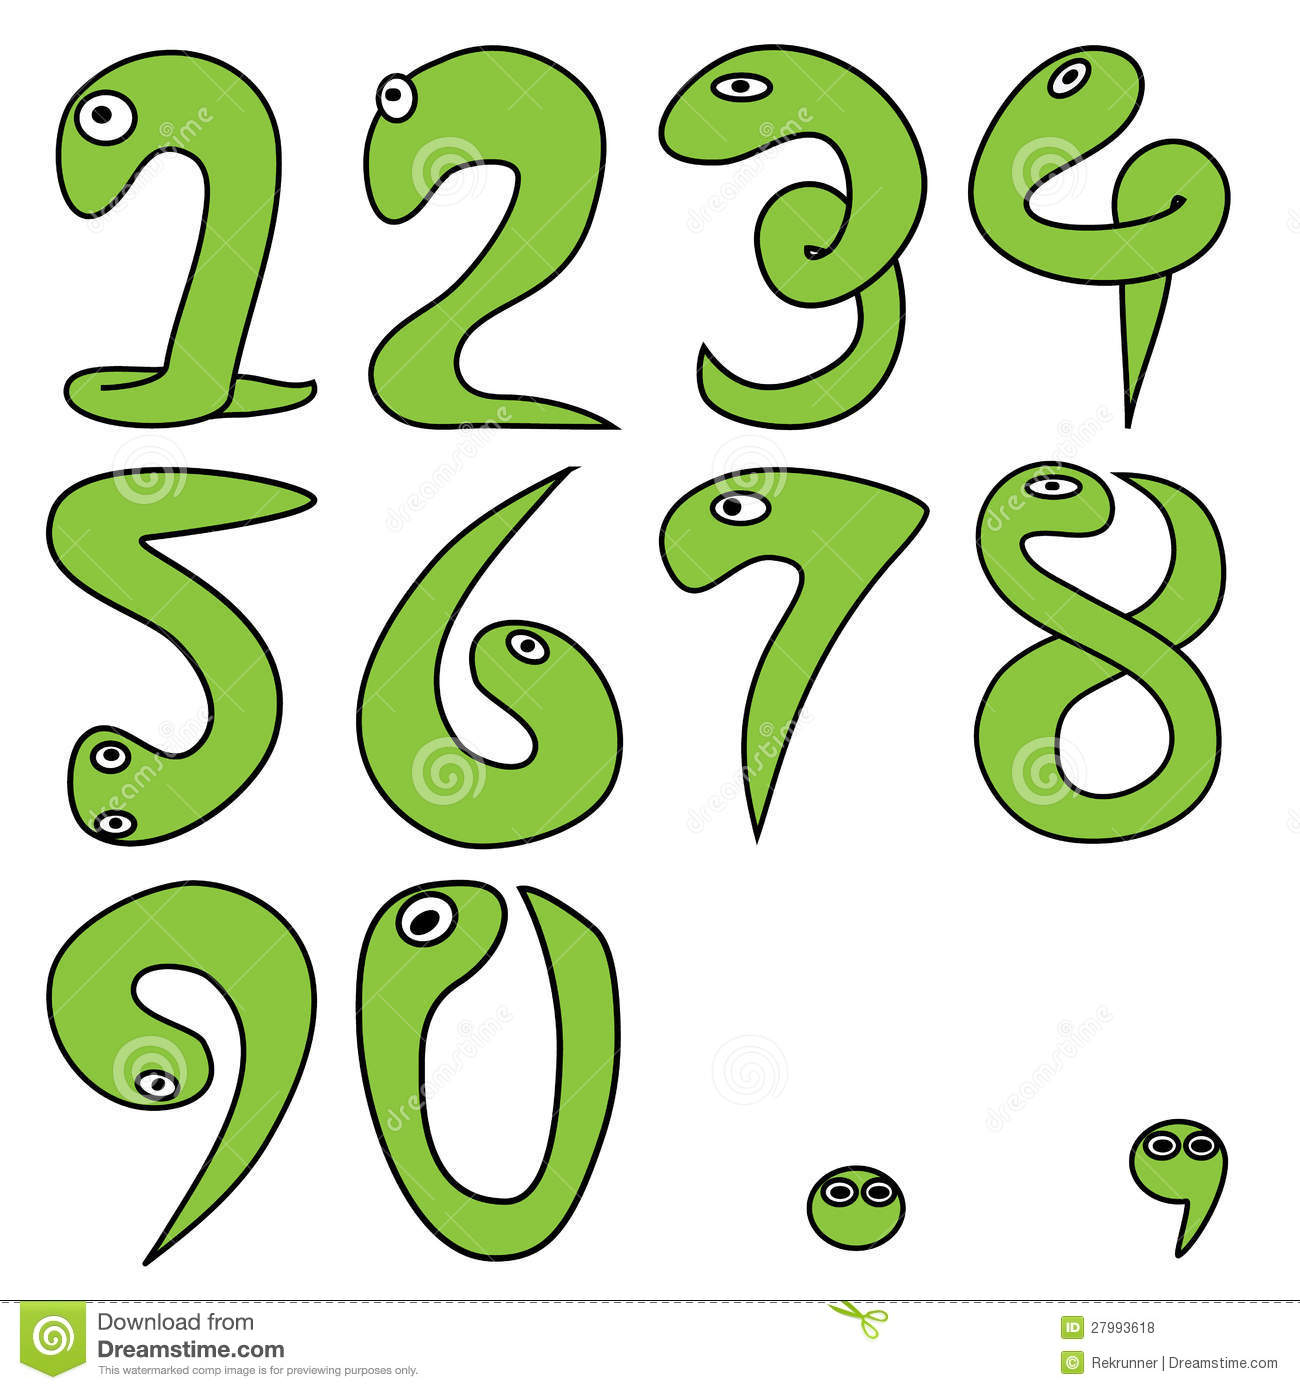 Punctuation Comma Clipart 1 9 With Period And Comma